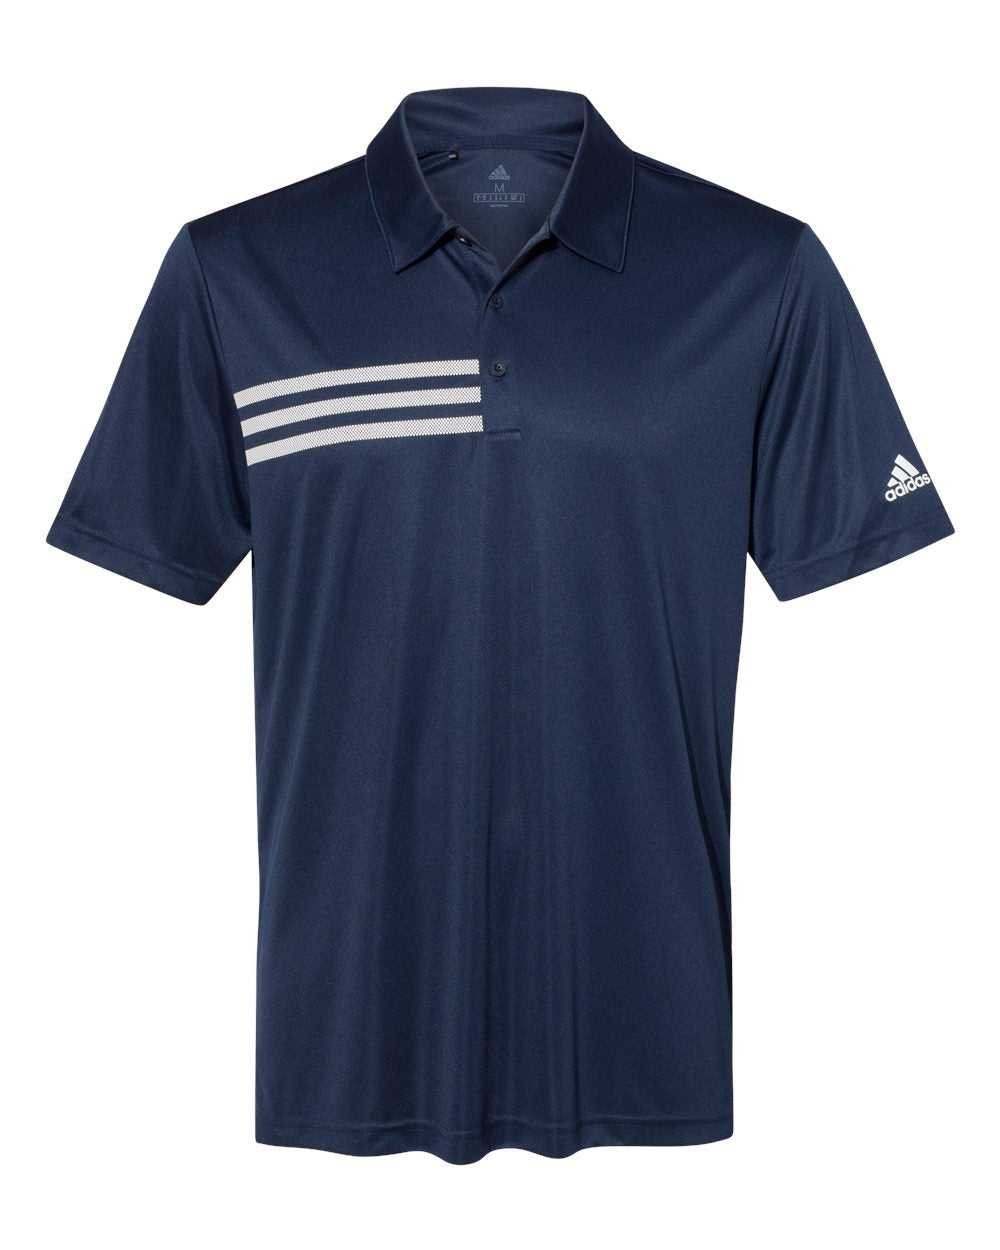 Adidas A324 3-Stripes Chest Sport Shirt - Collegiate Navy White - HIT a Double